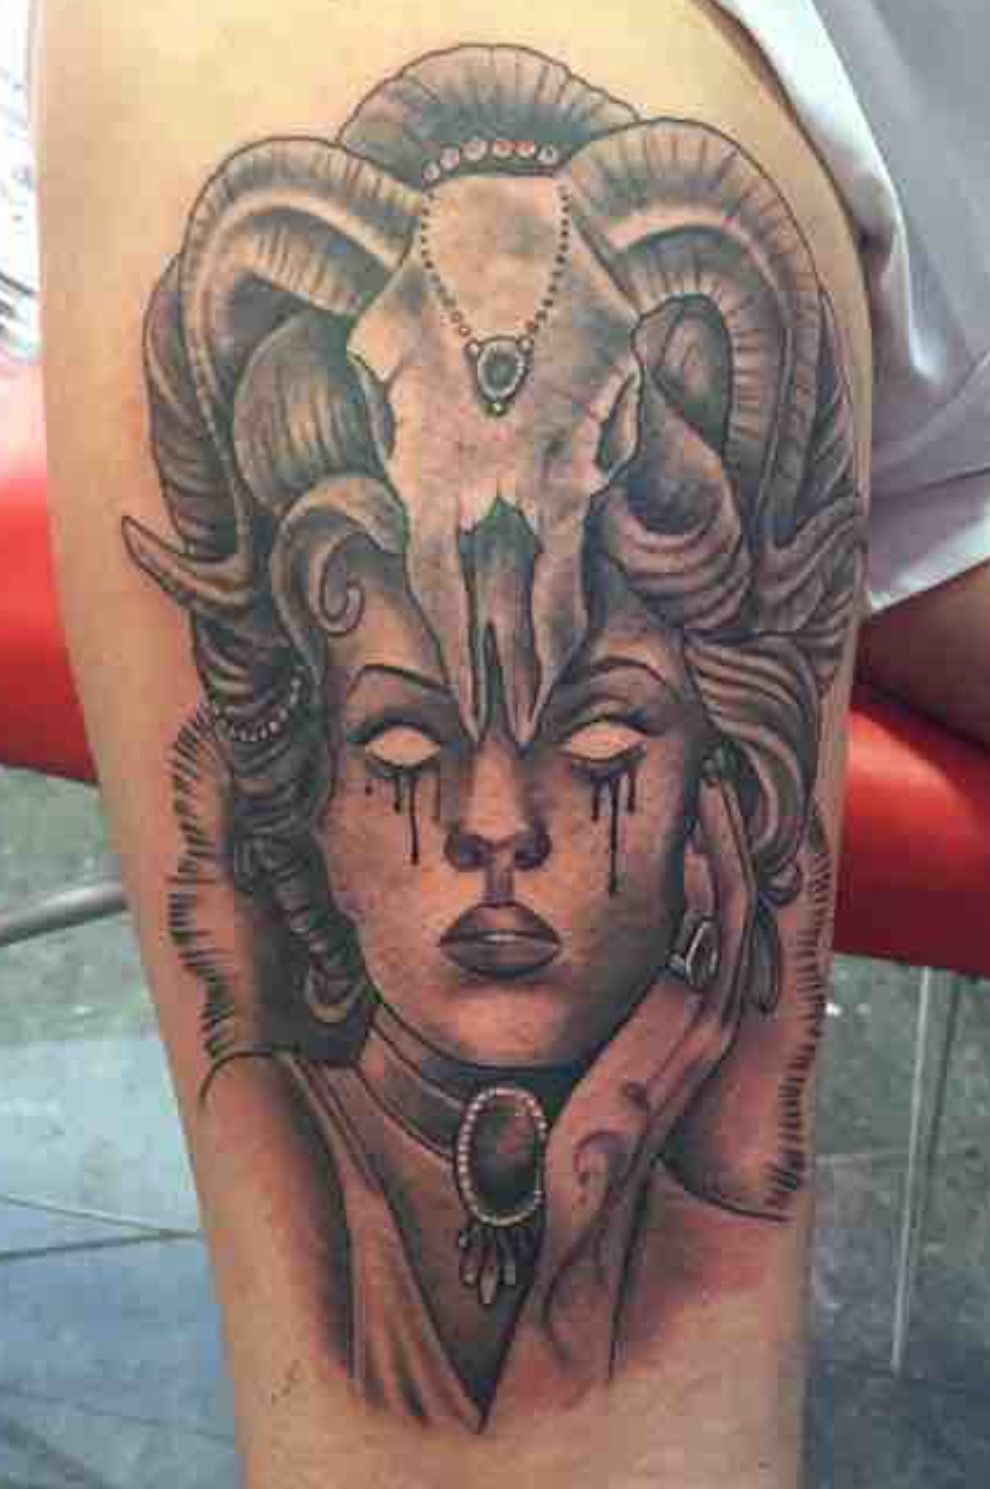 Corporate Ink Tattoos  Pascua Yaqui Tribe piece done by Mario Martinez Art   Tattoos  Facebook